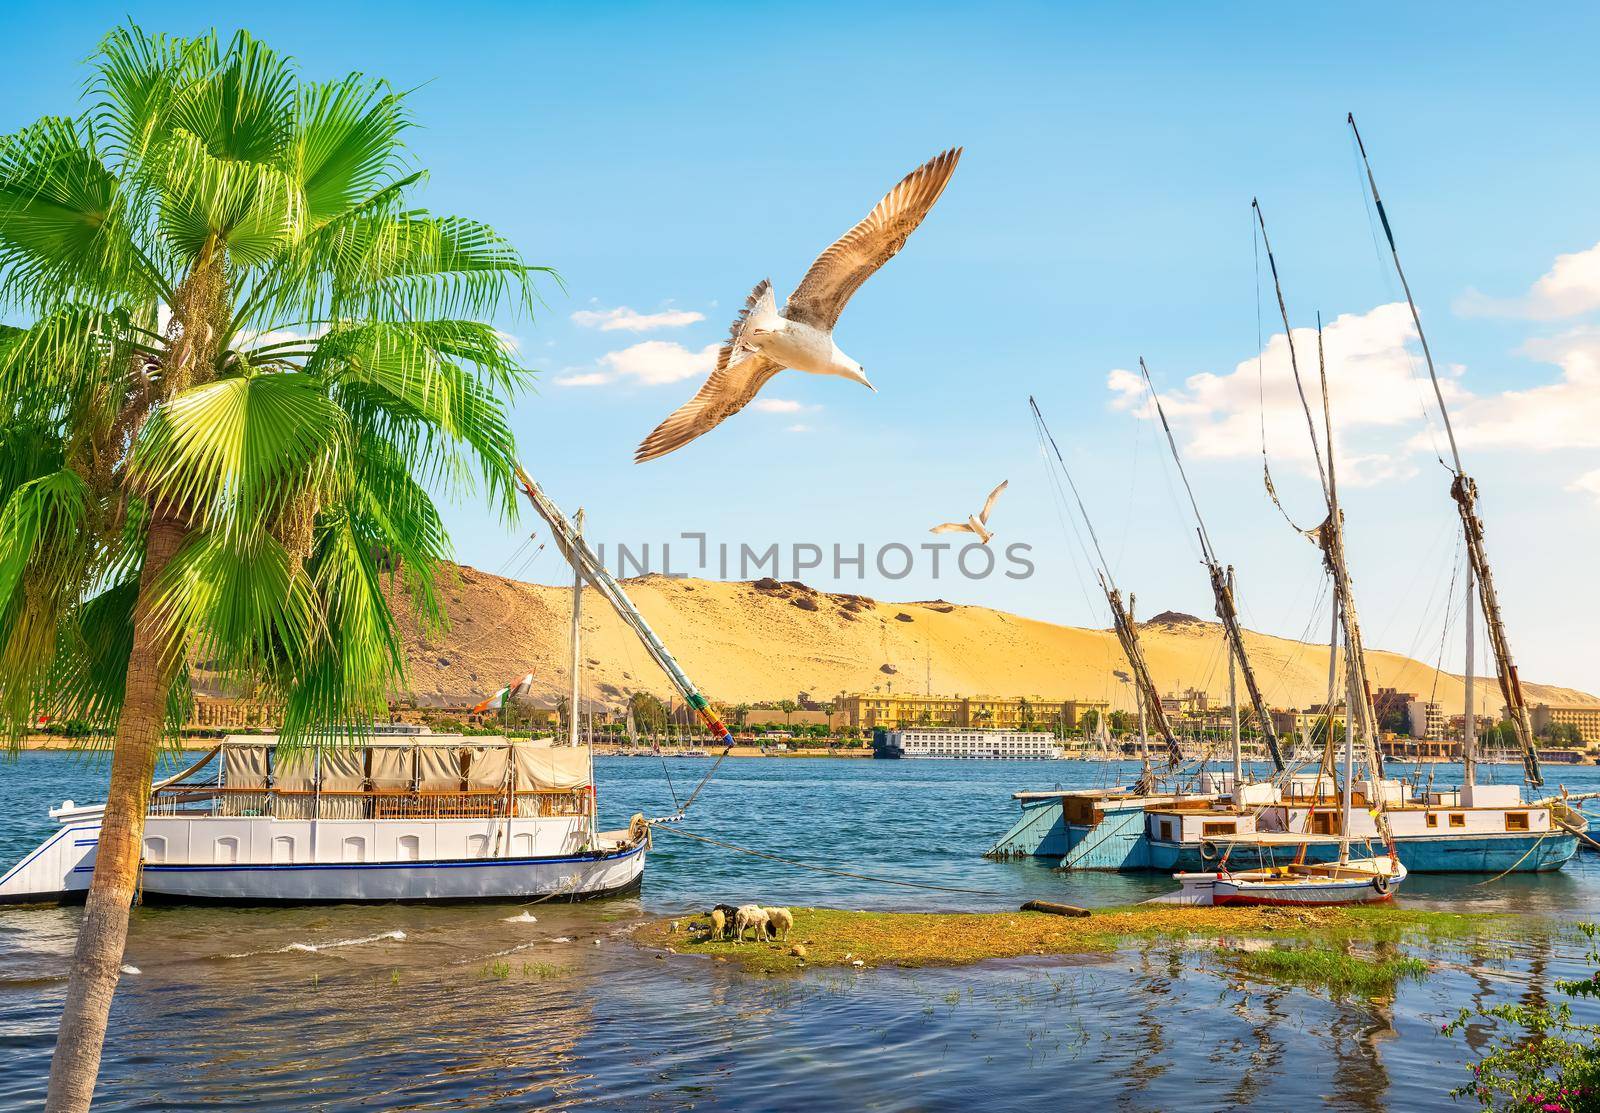 River Nile and boats at day in Aswan